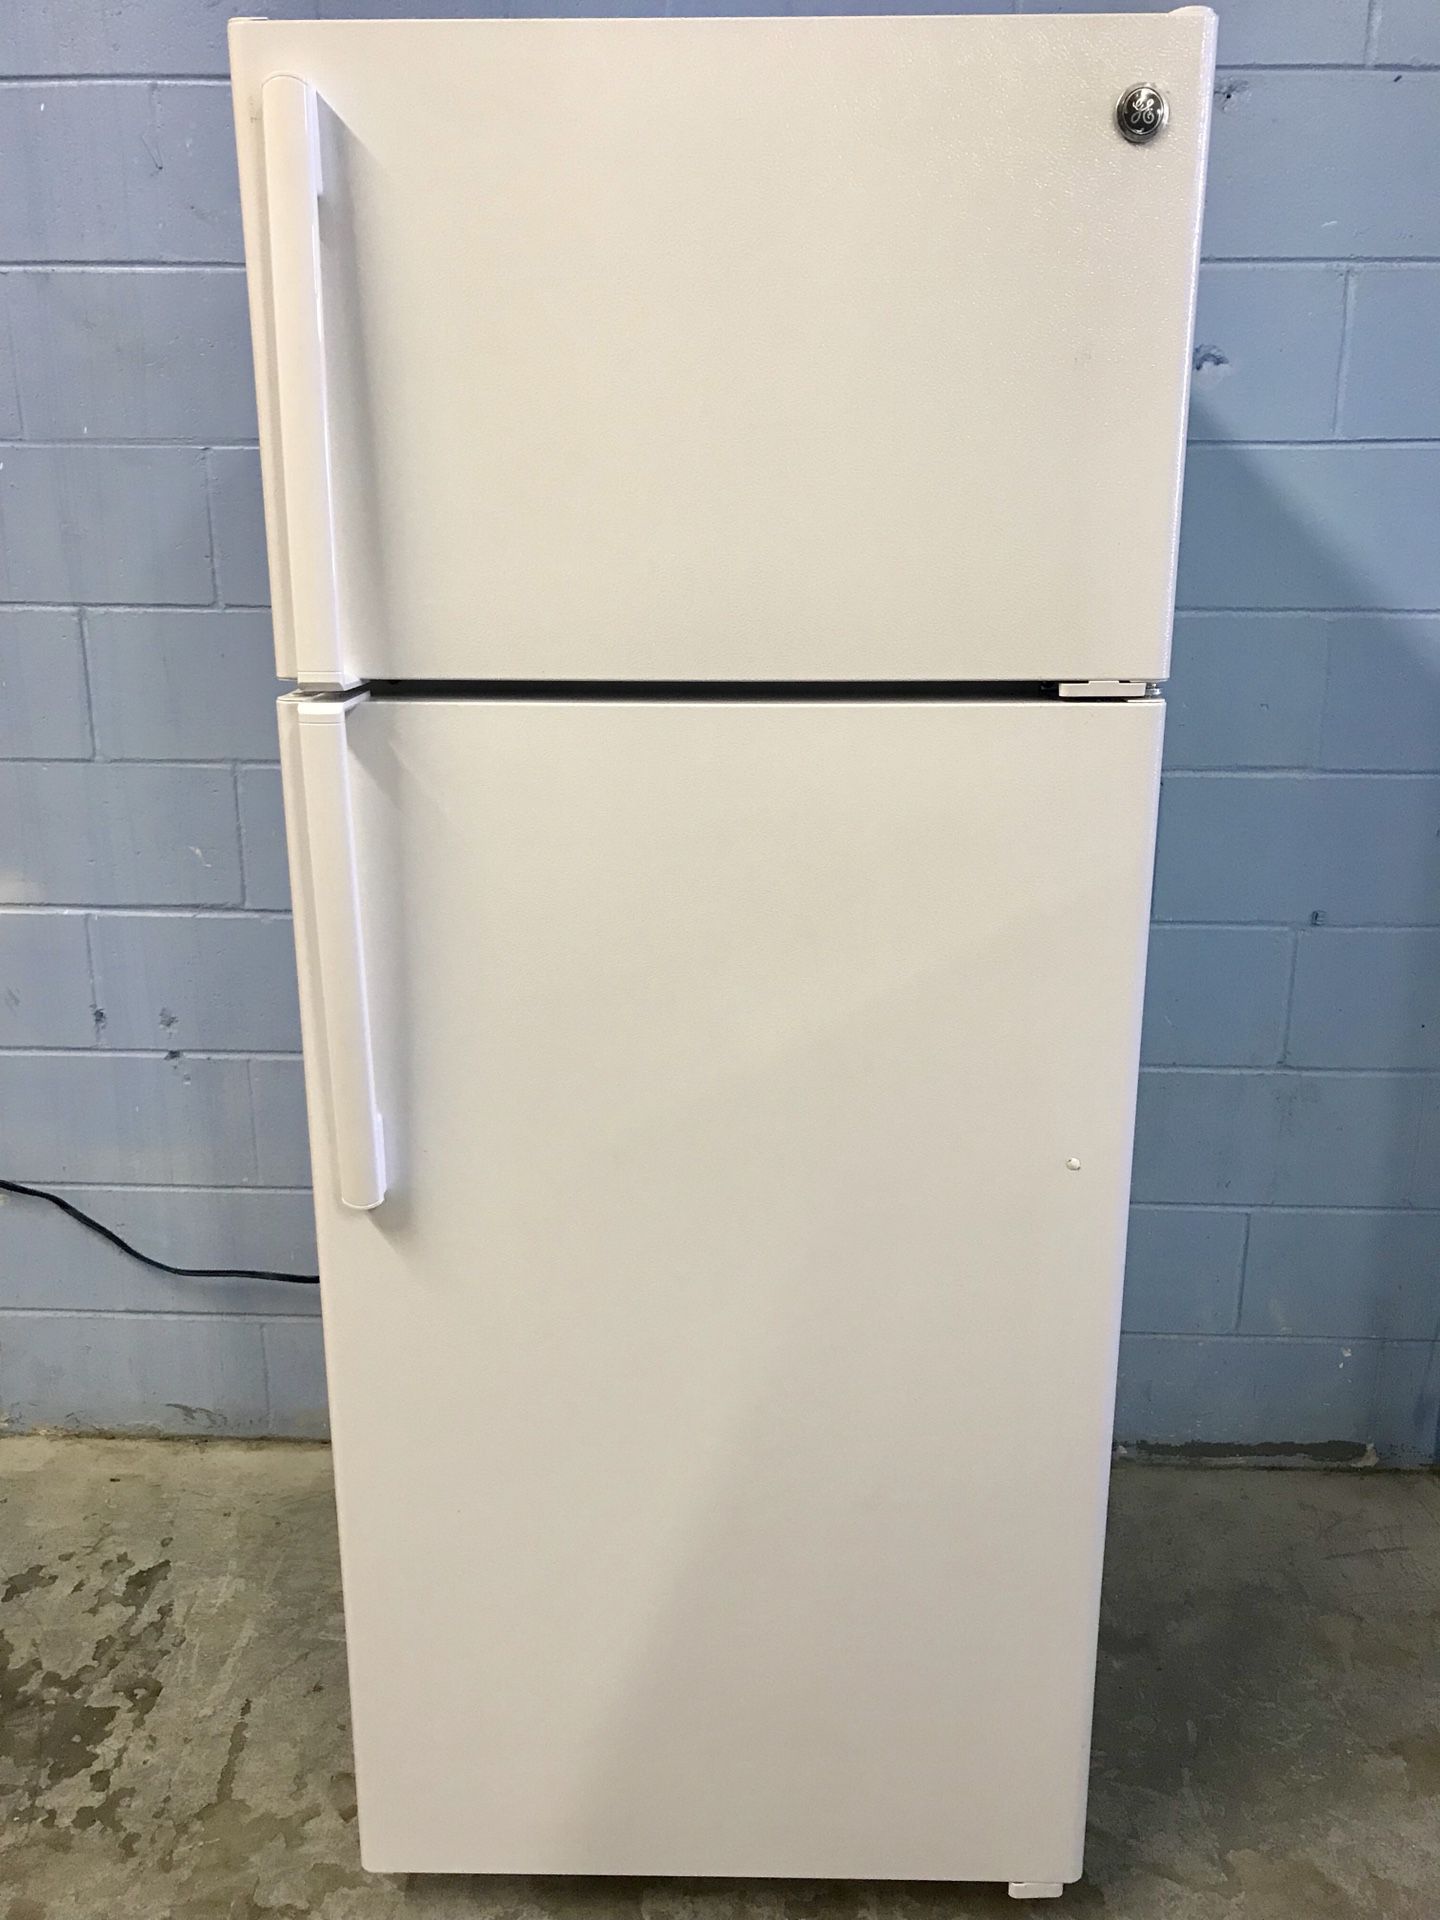 White GE 18 Cubic Foot Refrigerator Brand New